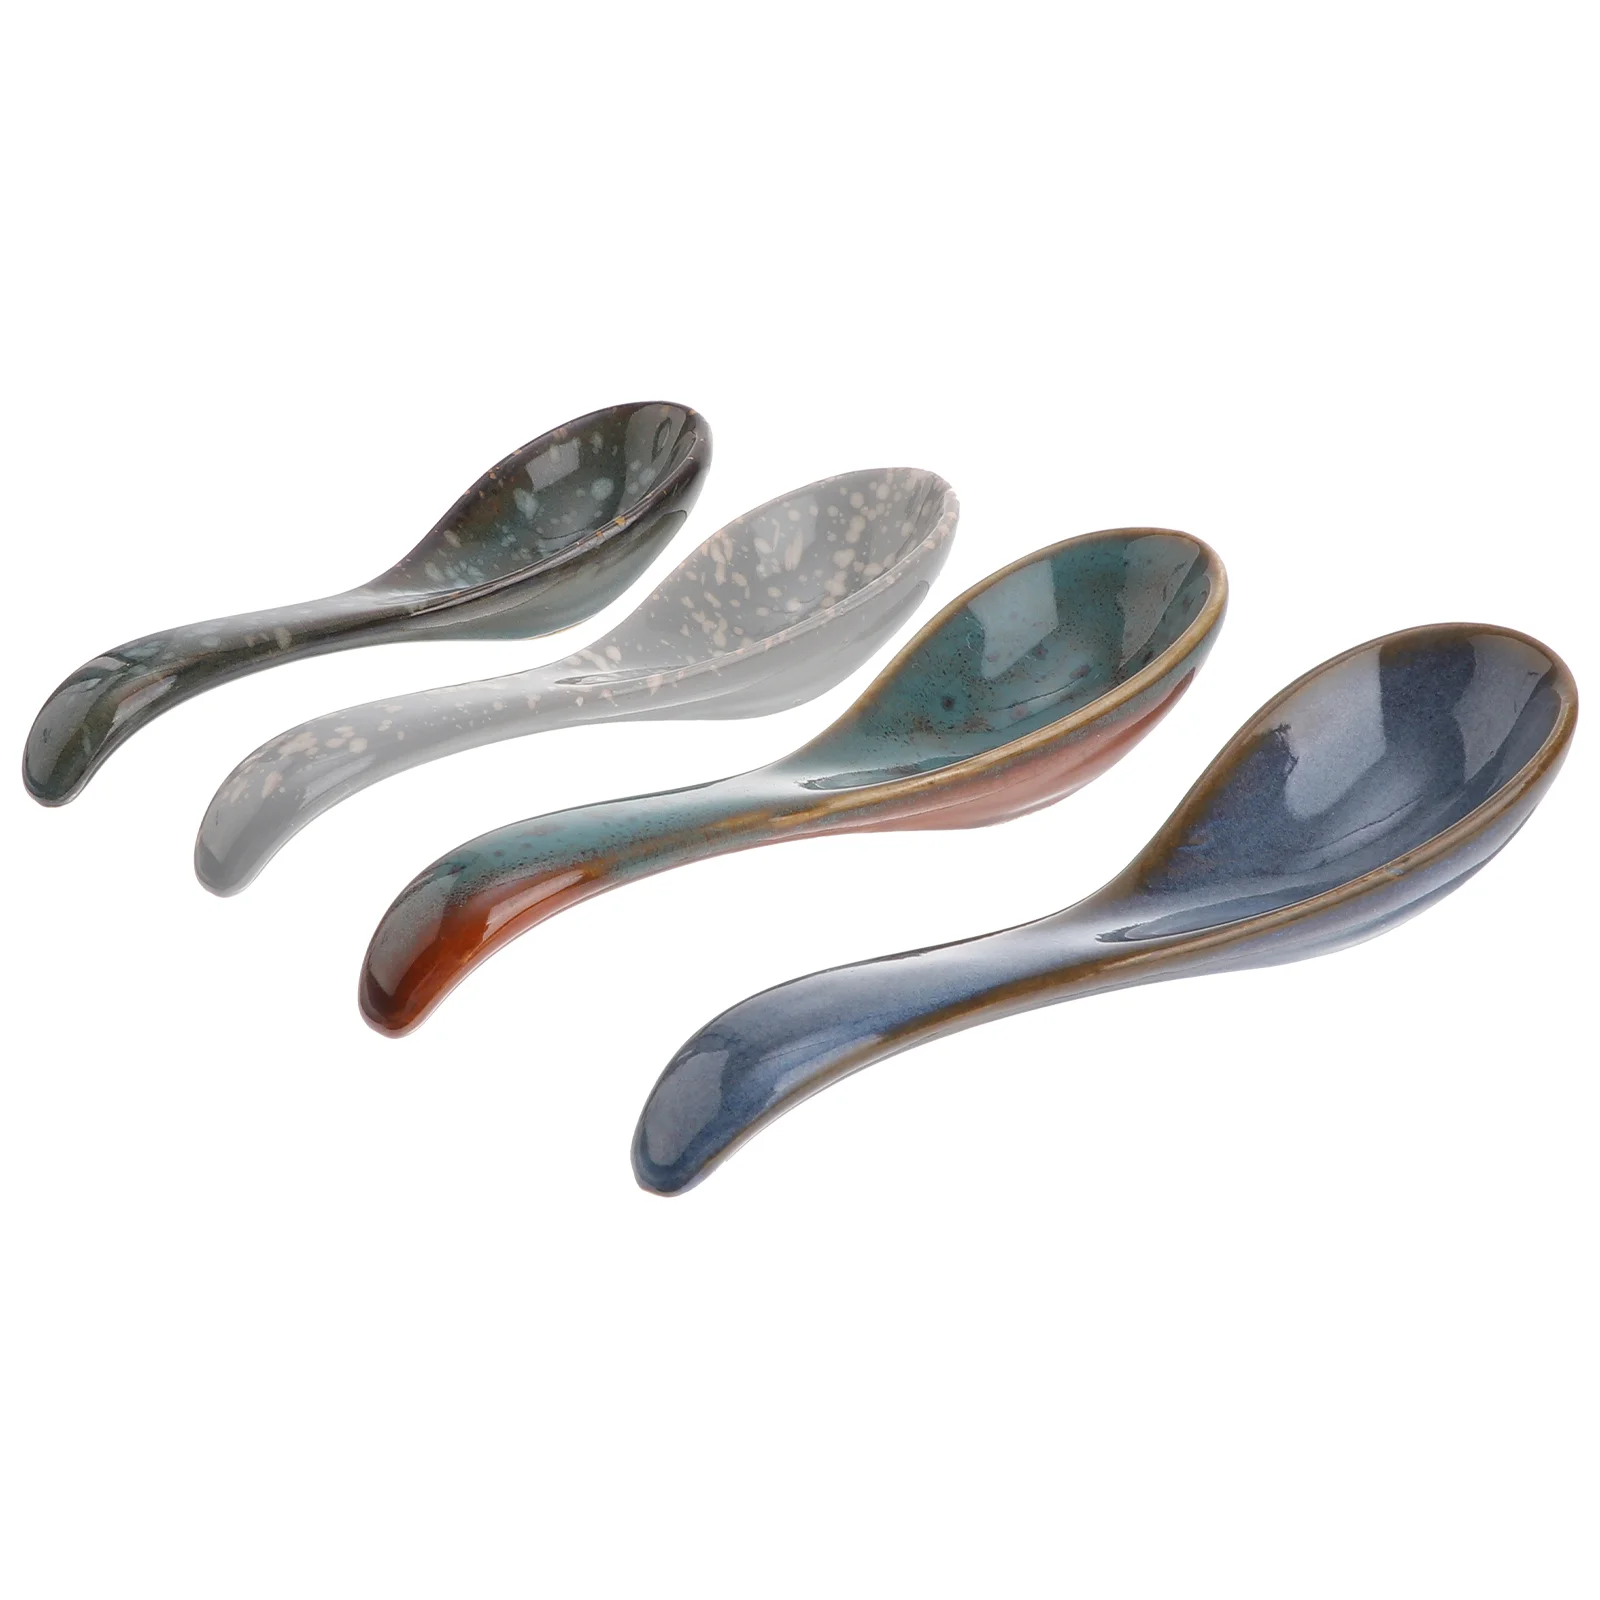 

4 Pcs Ceramic Spoon Japanese Spoon Small Spoons Condiment Chinese Rice Spoon Ceramics Kitchen Mixing Spoon Banquet